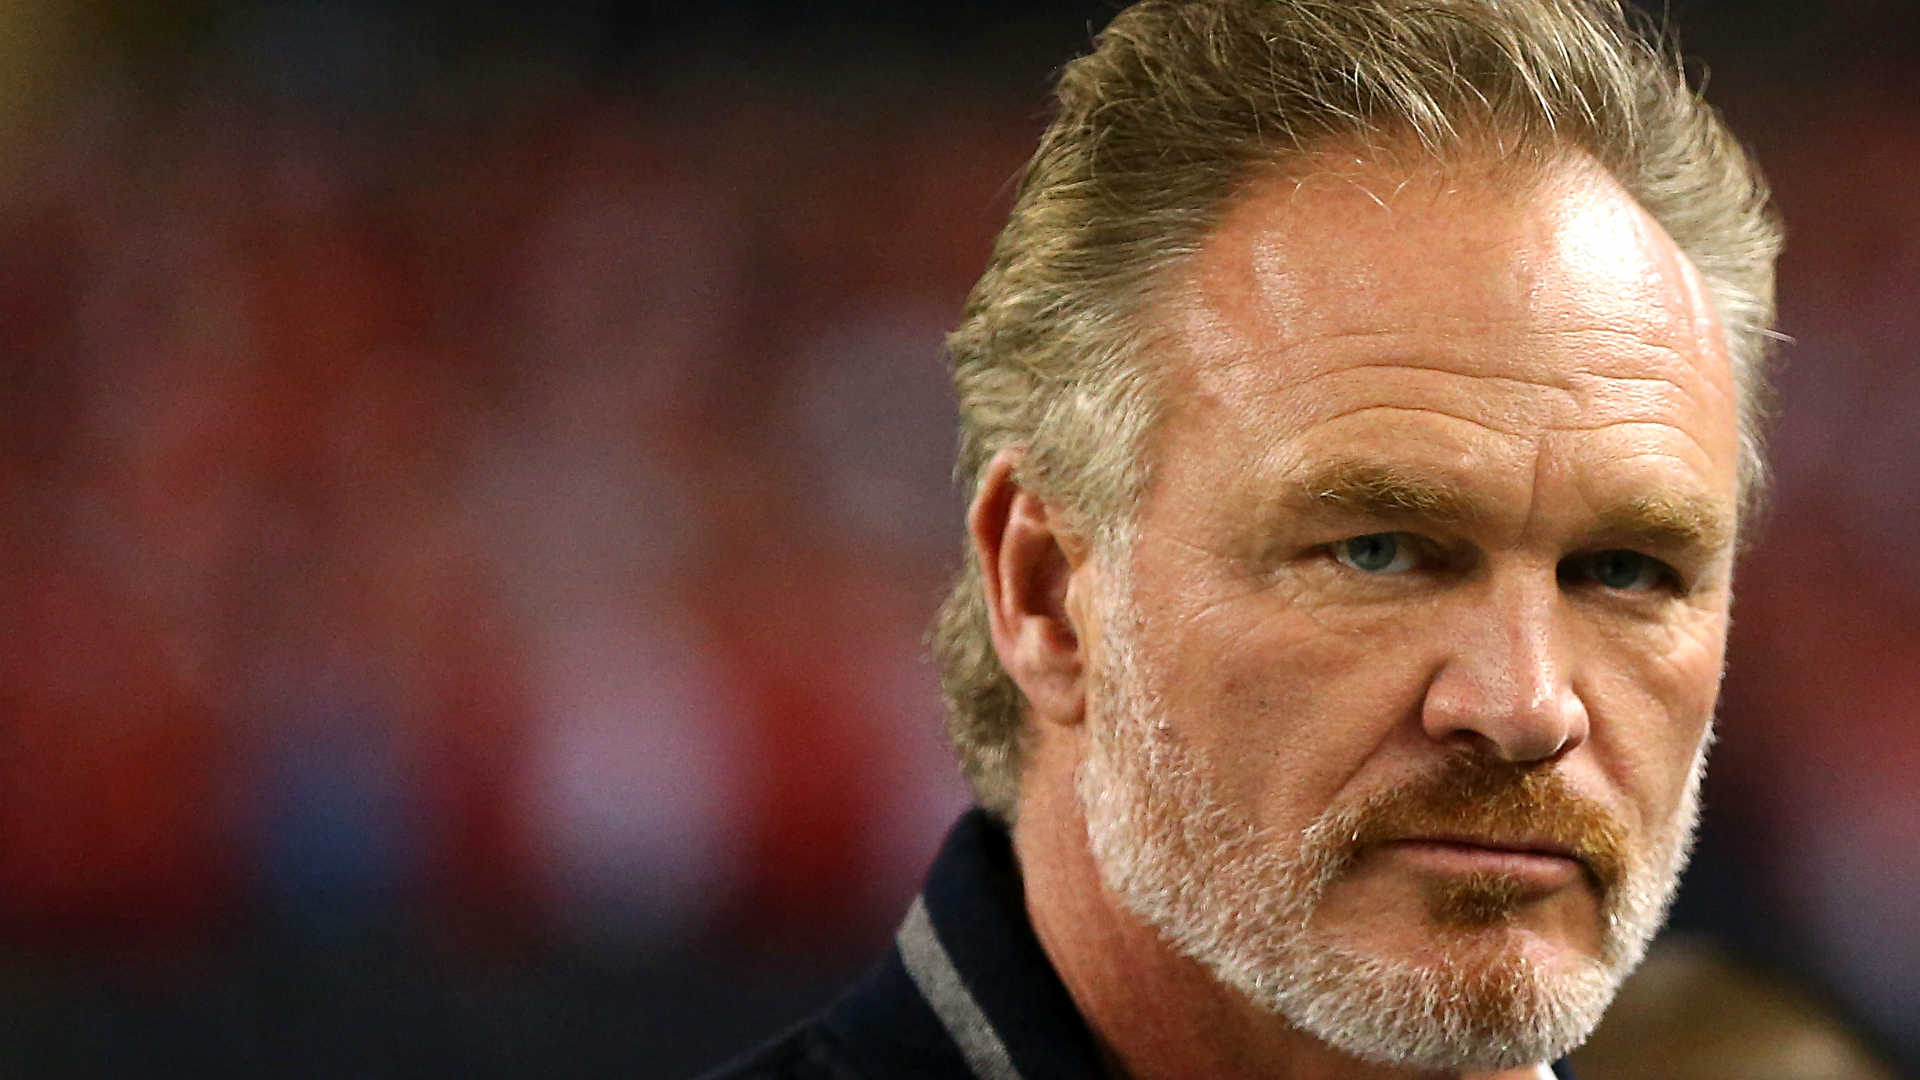 Oklahoma icon Brian Bosworth weighs in on Sooners' defense, Baker Mayfield's future